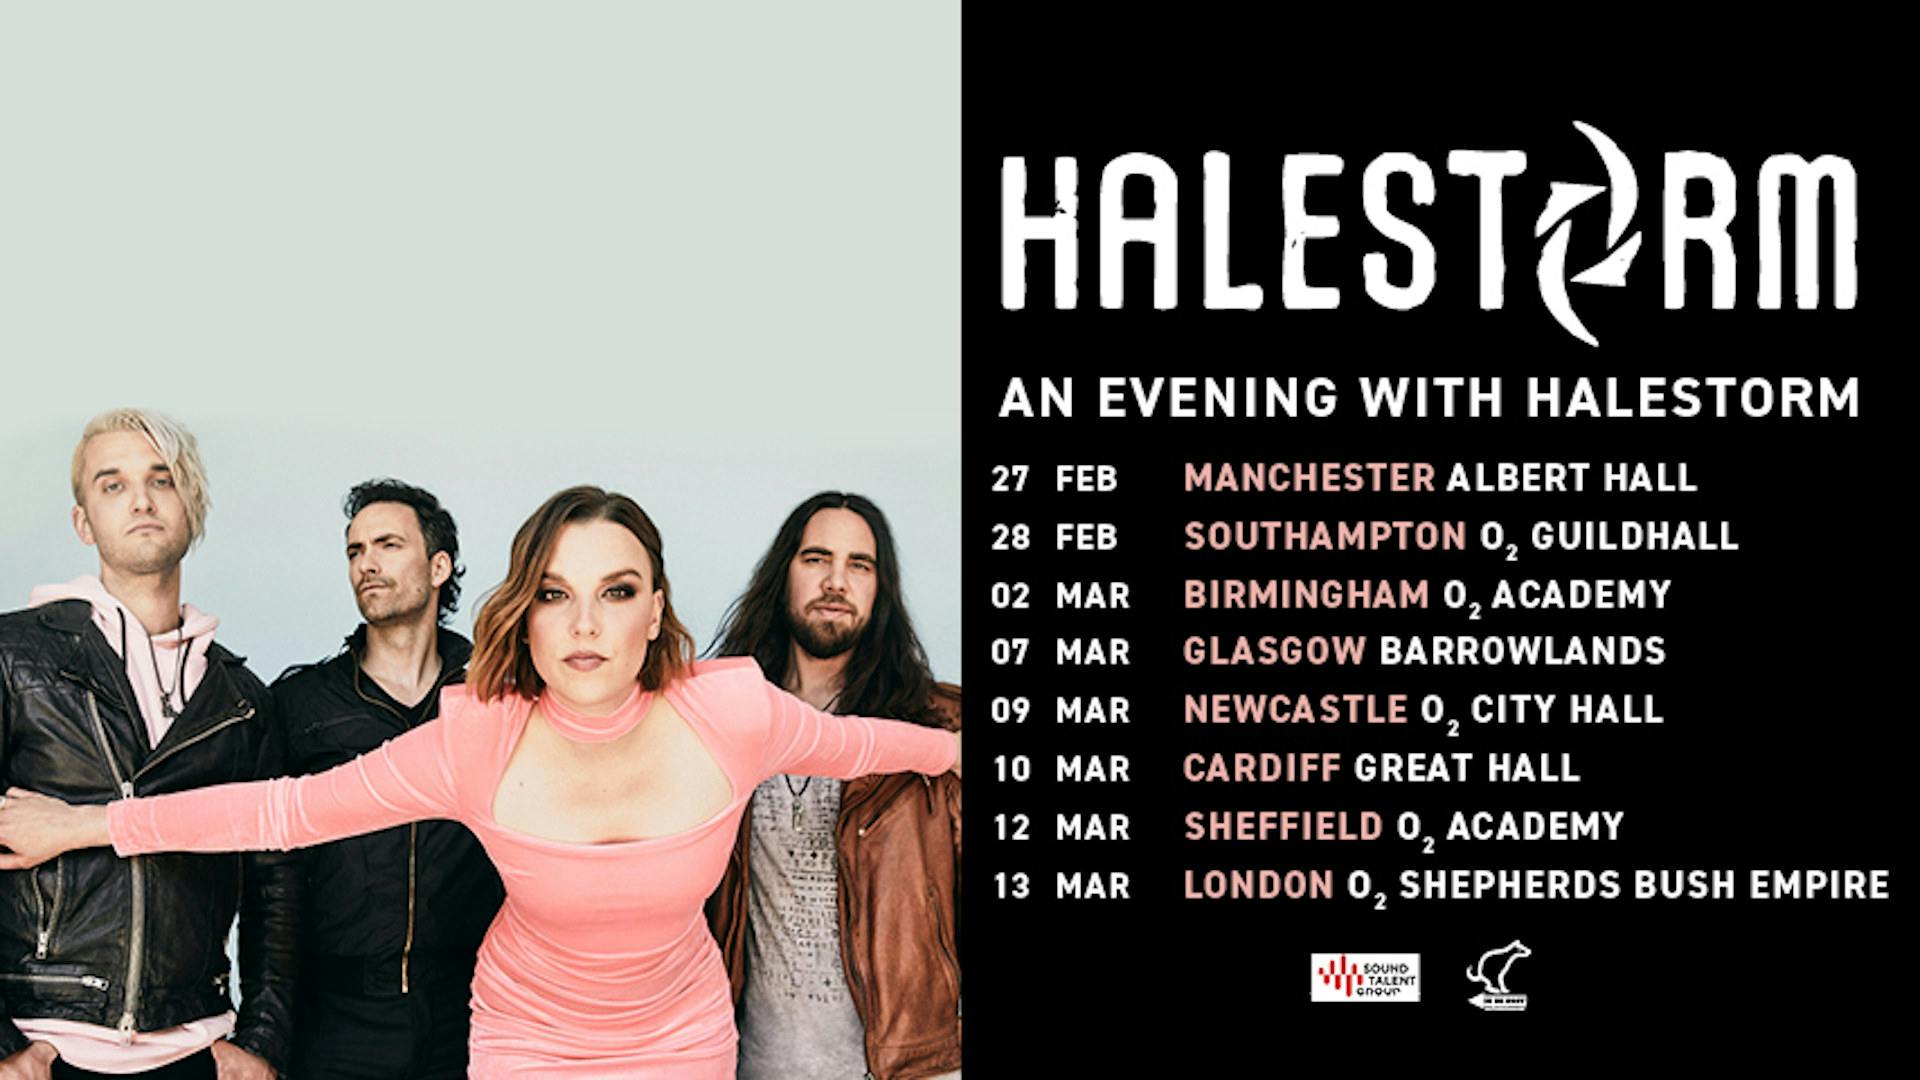 An Evening With Halestorm